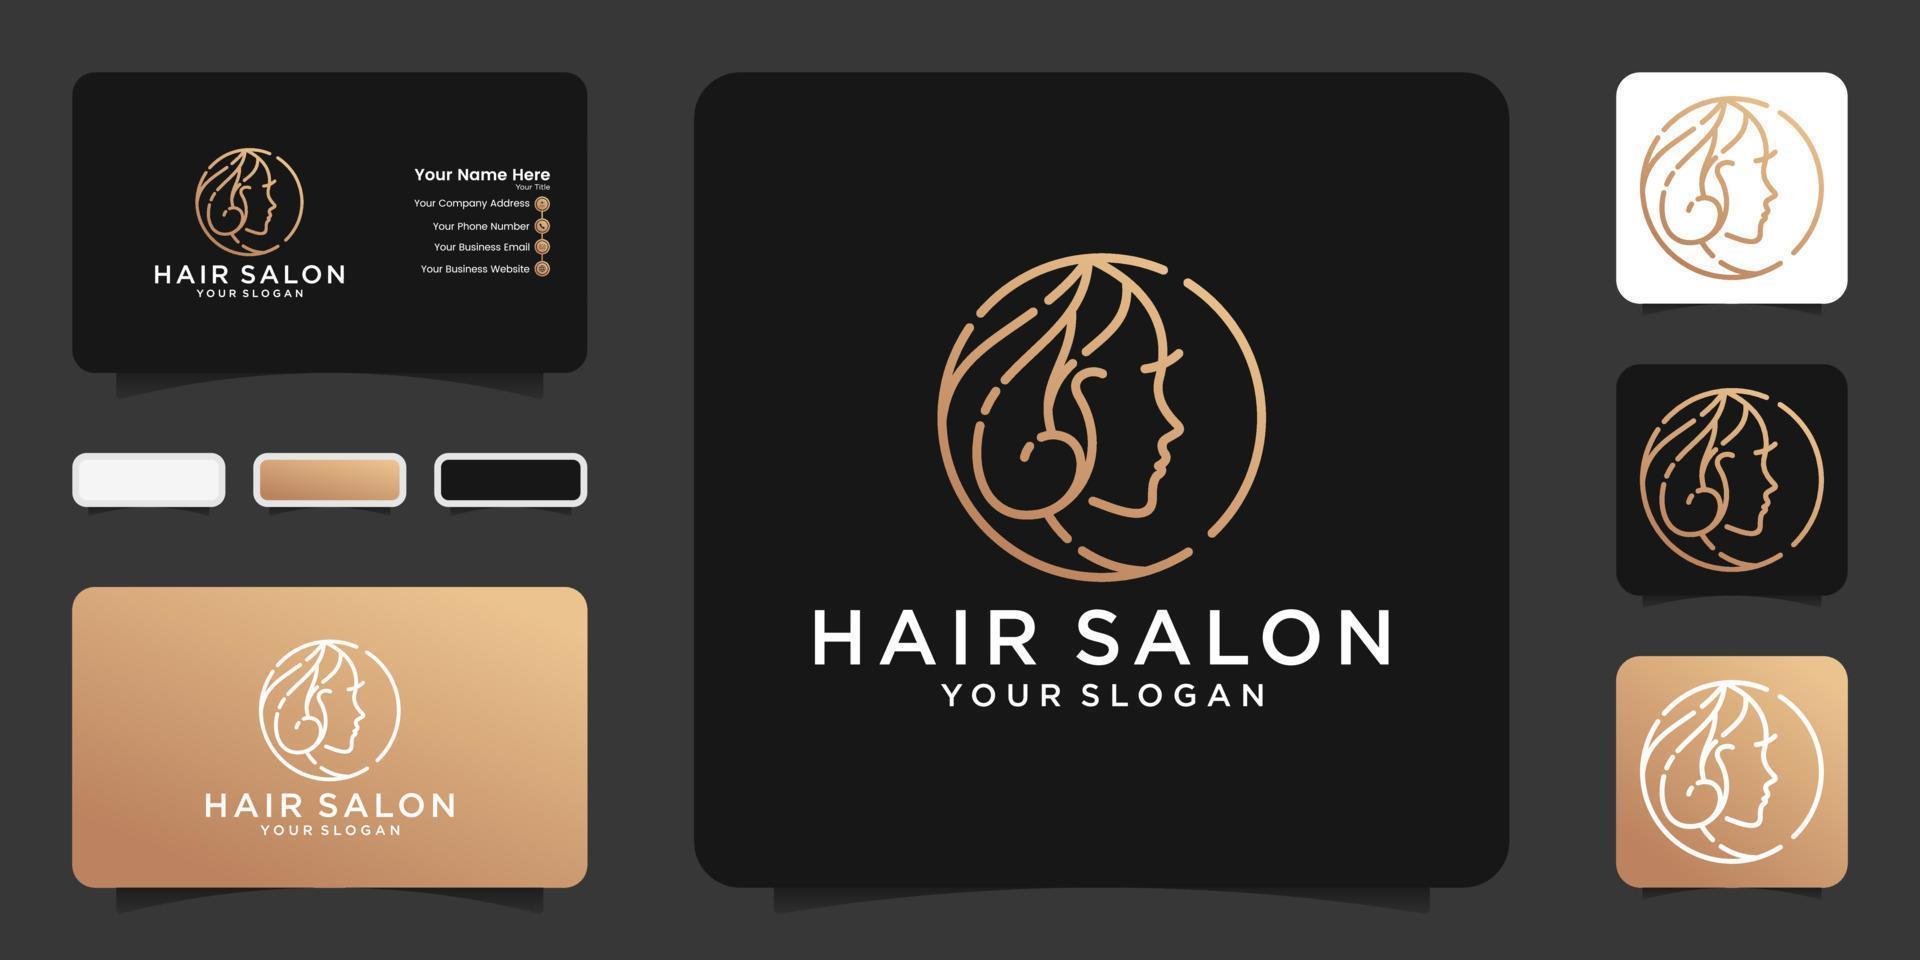 female beauty salon logo with line art style and business card inspiration vector